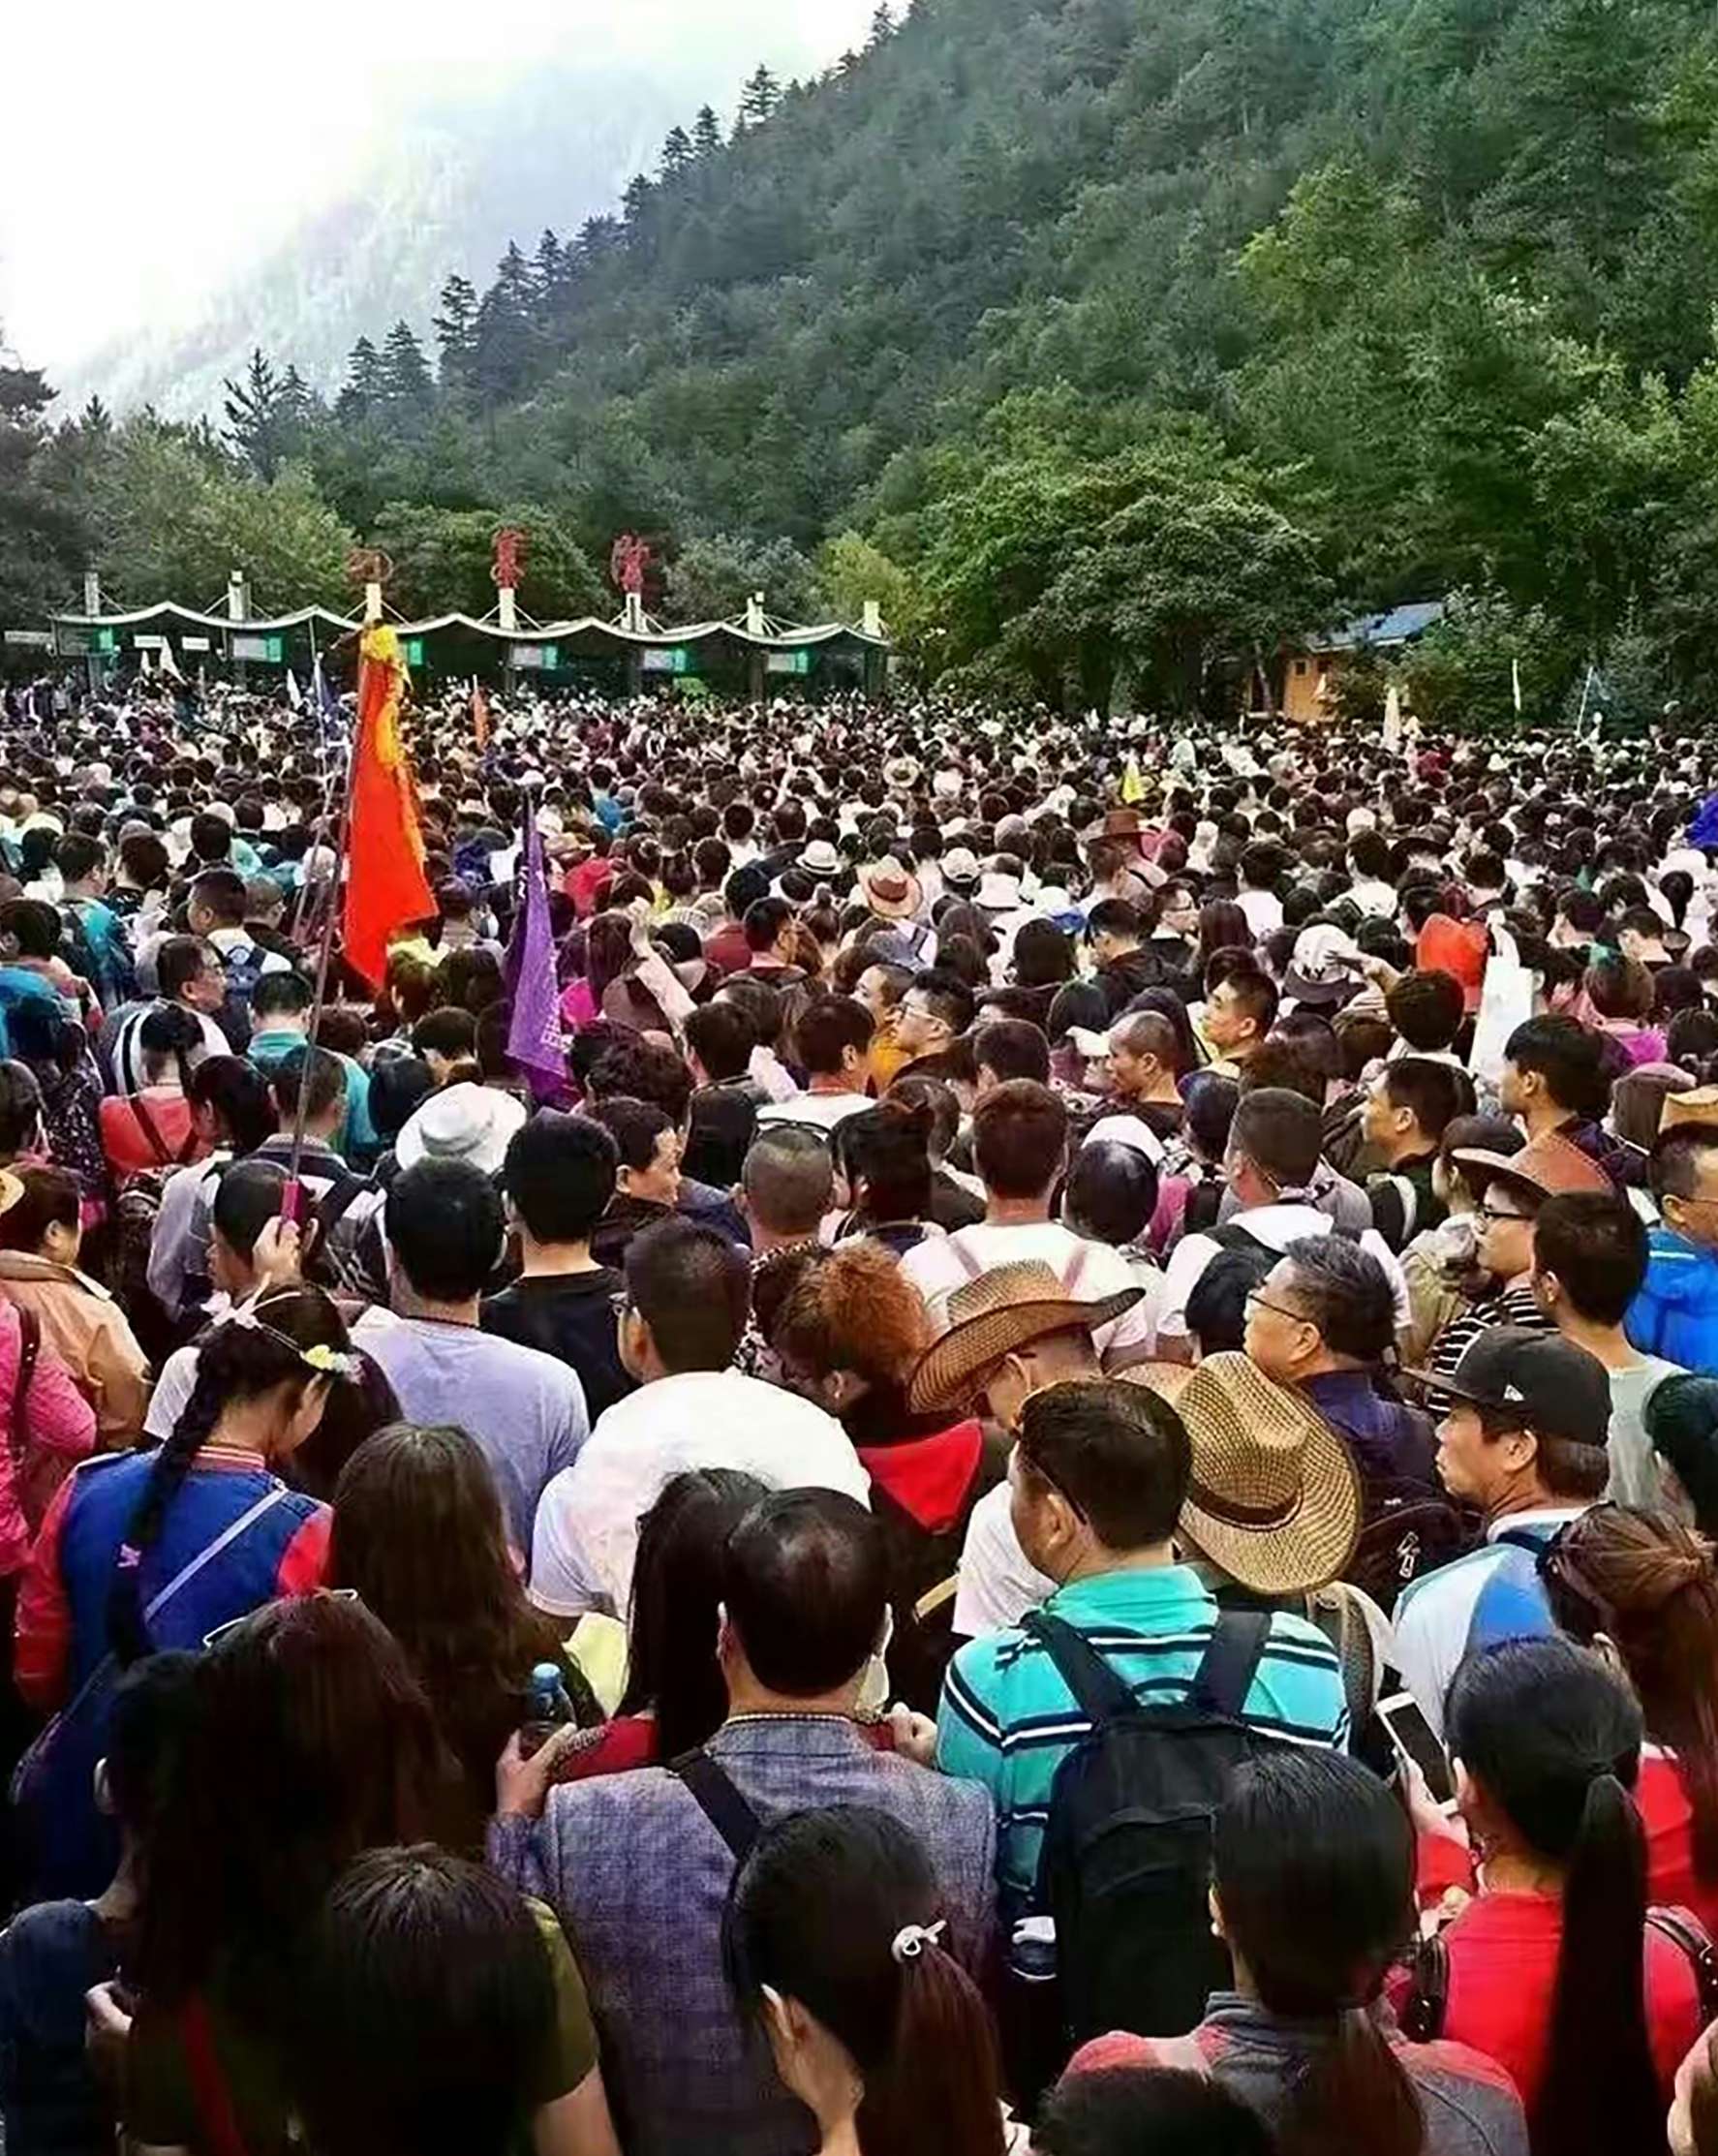 Queues outside some of the park gates. Photo: Thepaper.cn